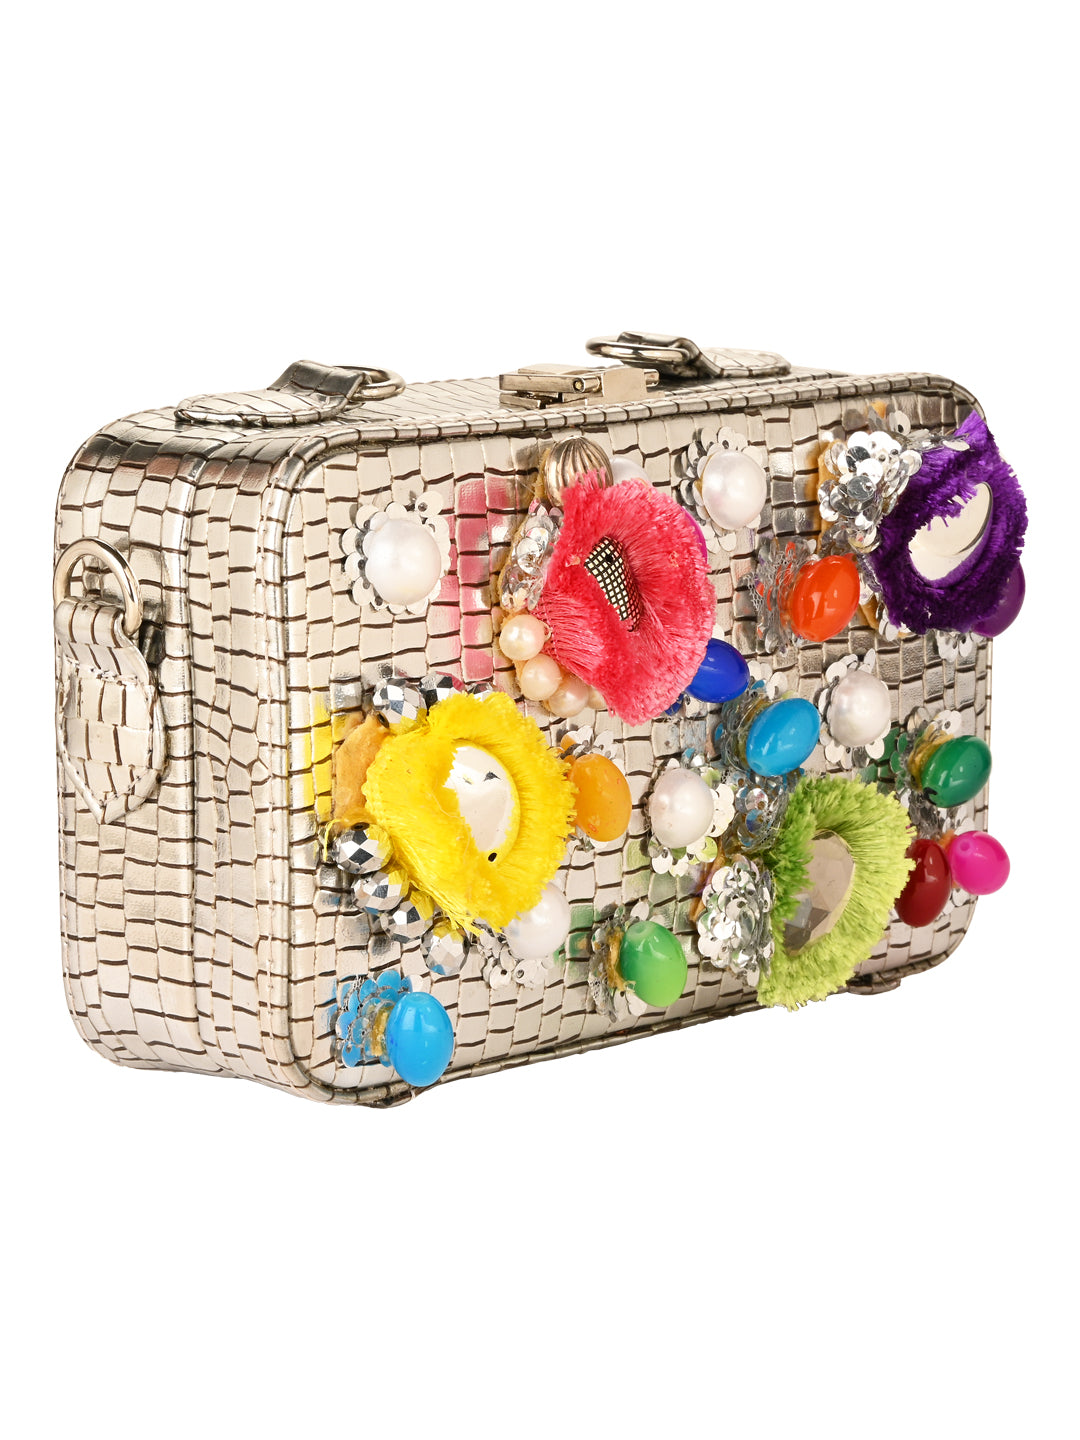 A Rangeela silver waist cum sling clutch bag with colorful flowers on it by Vdesi.